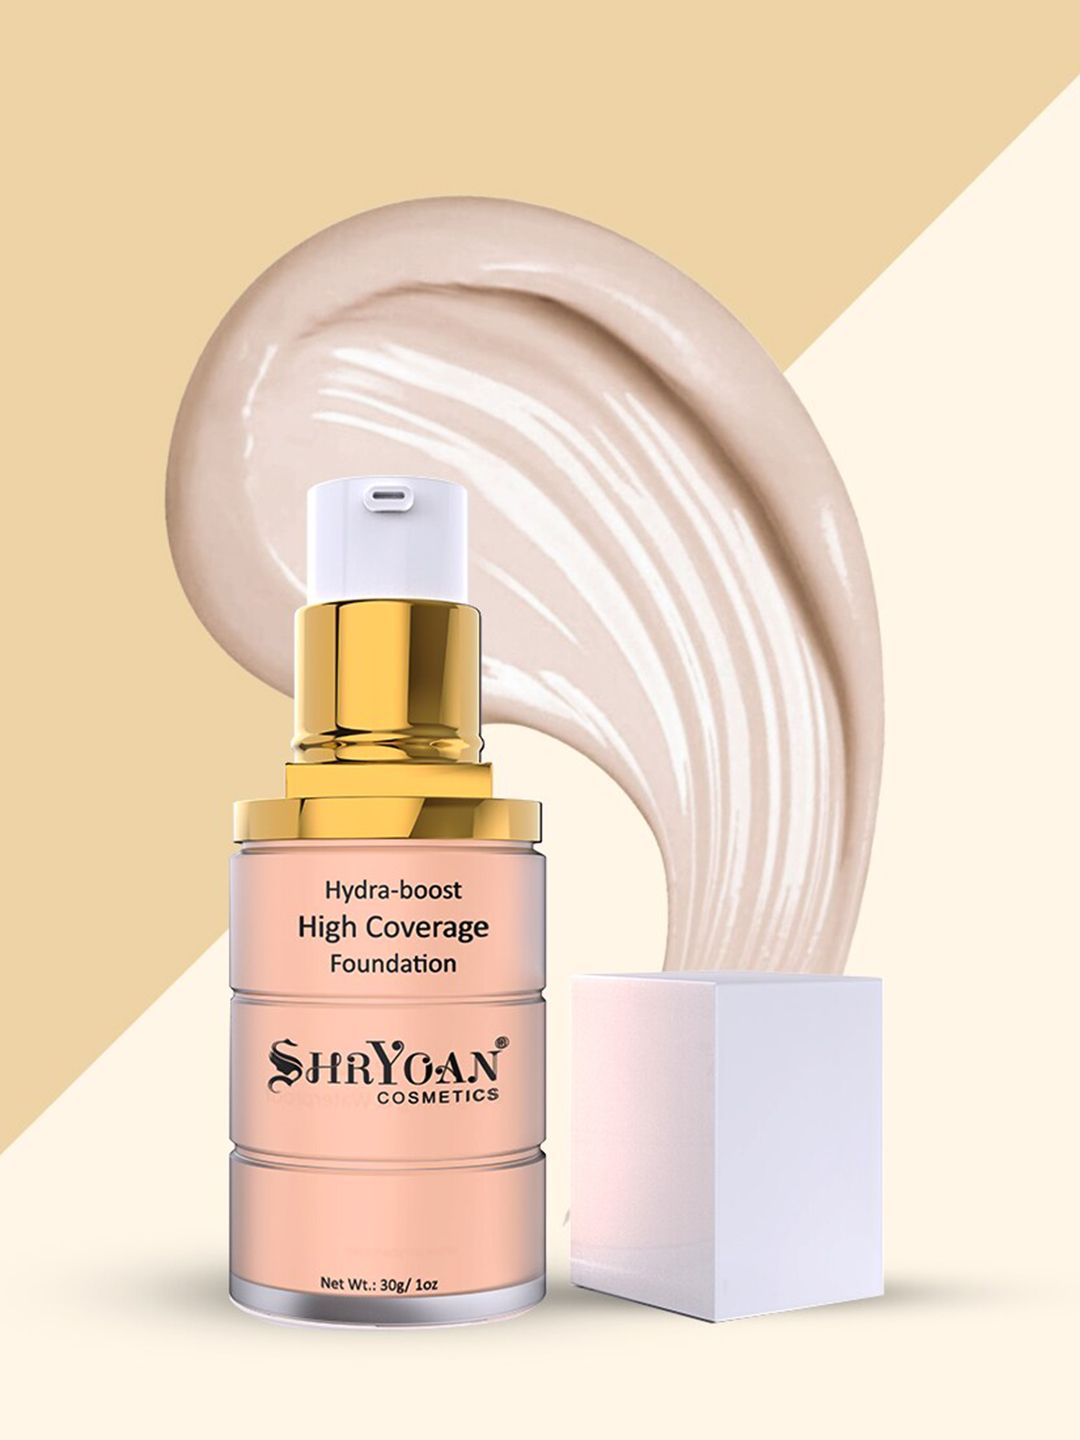 SHRYOAN Hydra-boost High Coverage Foundation 40g Price in India